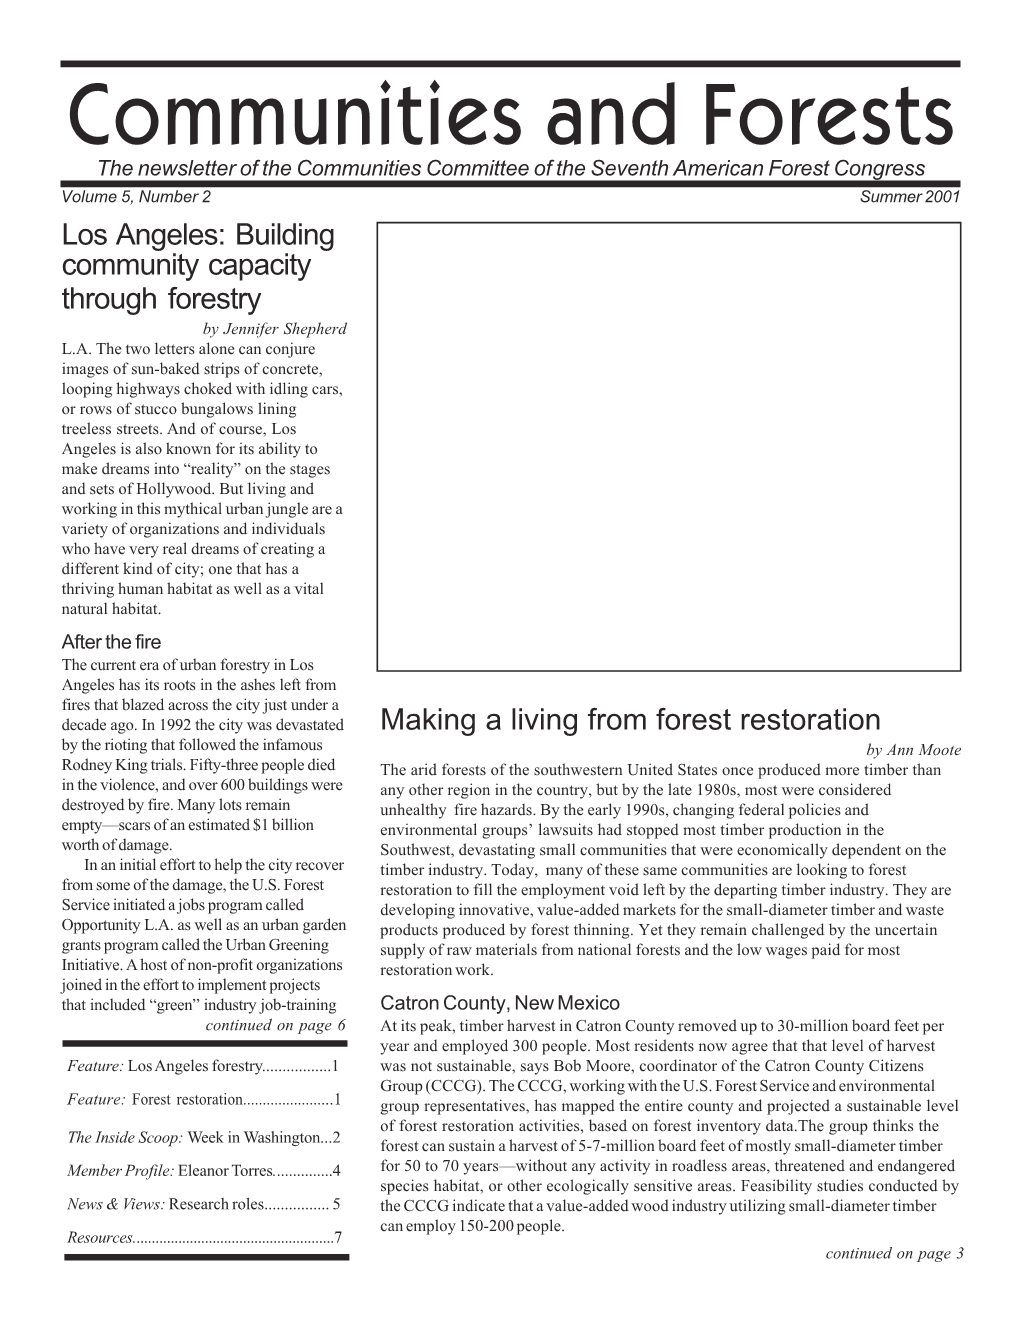 Volume 5, Number 2 Summer 2001 Los Angeles: Building Community Capacity Through Forestry by Jennifer Shepherd L.A